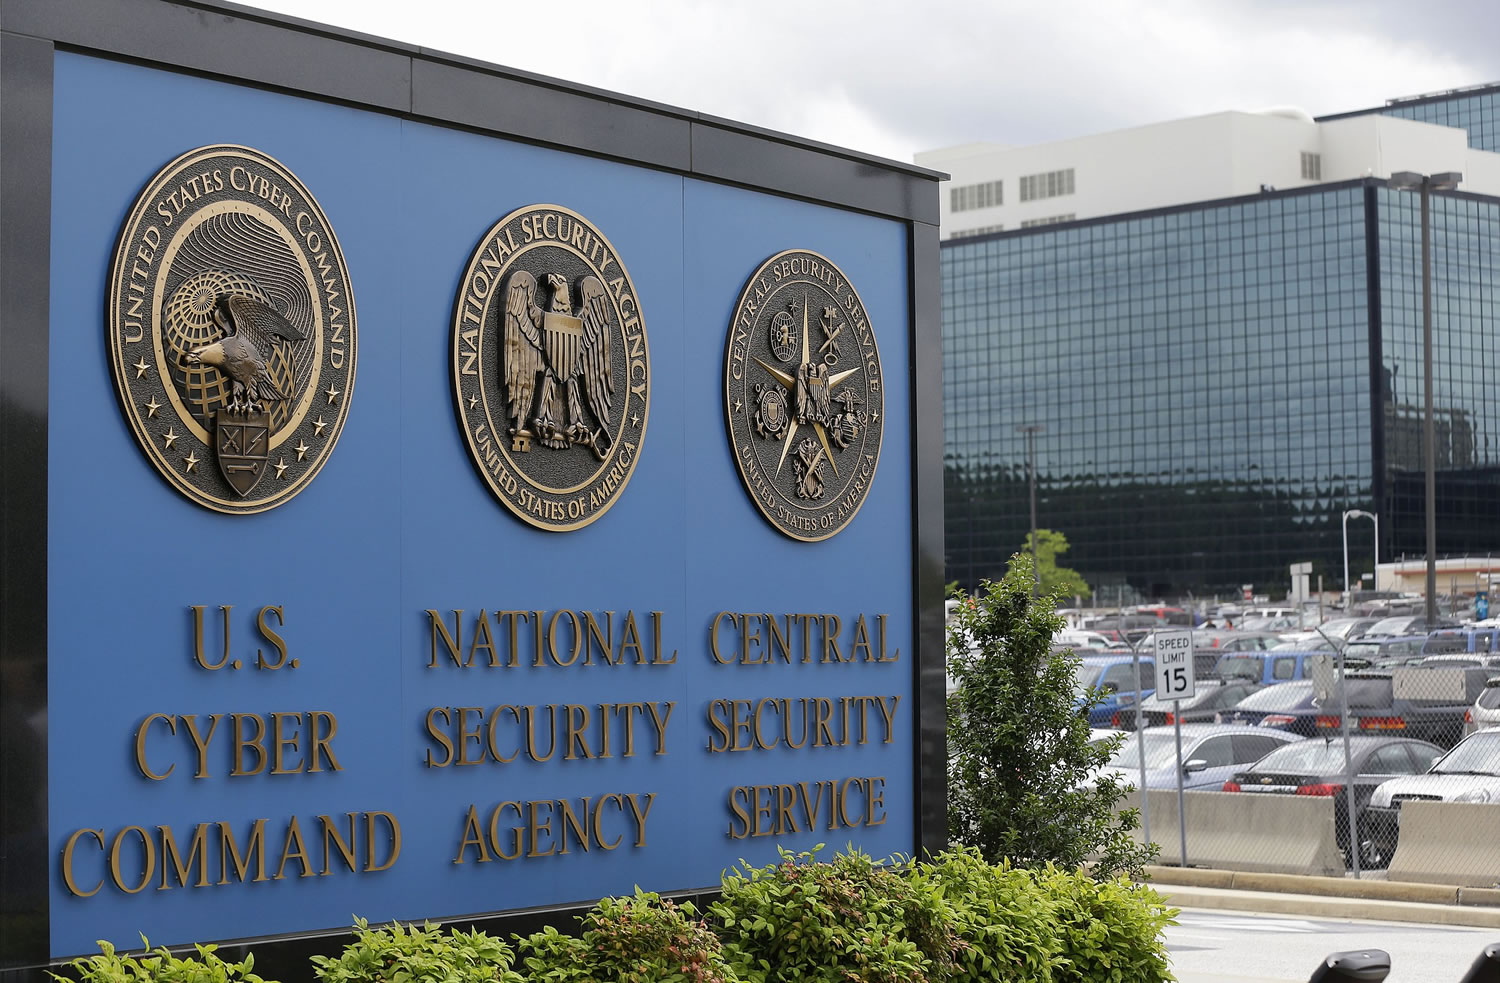 In this June 6, 2013 file photo, a sign stands outside the National Security Agency (NSA) campus in Fort Meade, Md.